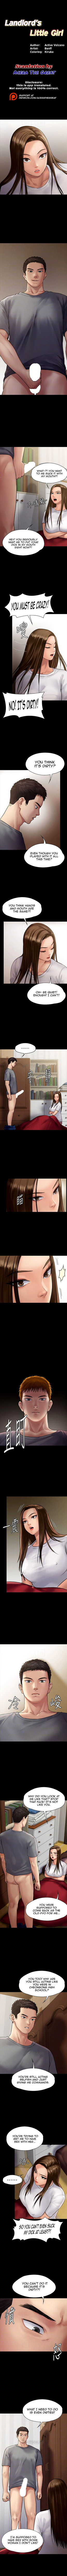 Panel Image 1 for chapter 131 of manhwa Queen Bee on read.oppai.stream